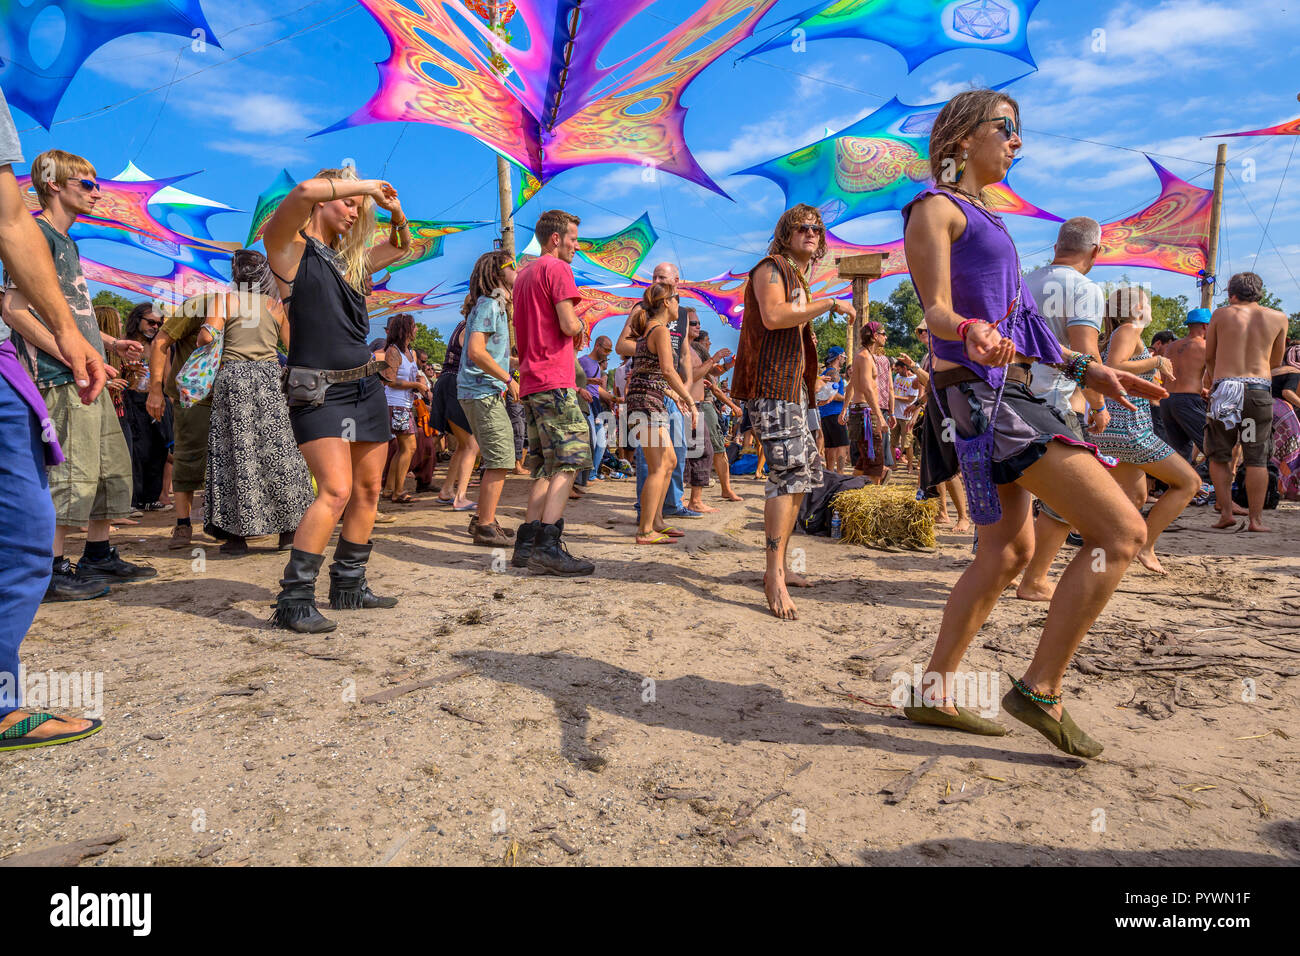 LEEUWARDEN, NETHERLANDS-AUGUST 30, 2015: Colorful party people dancing on the sandy dancefloor during daytime on Psy-Fi open air psychedelic trance mu Stock Photo